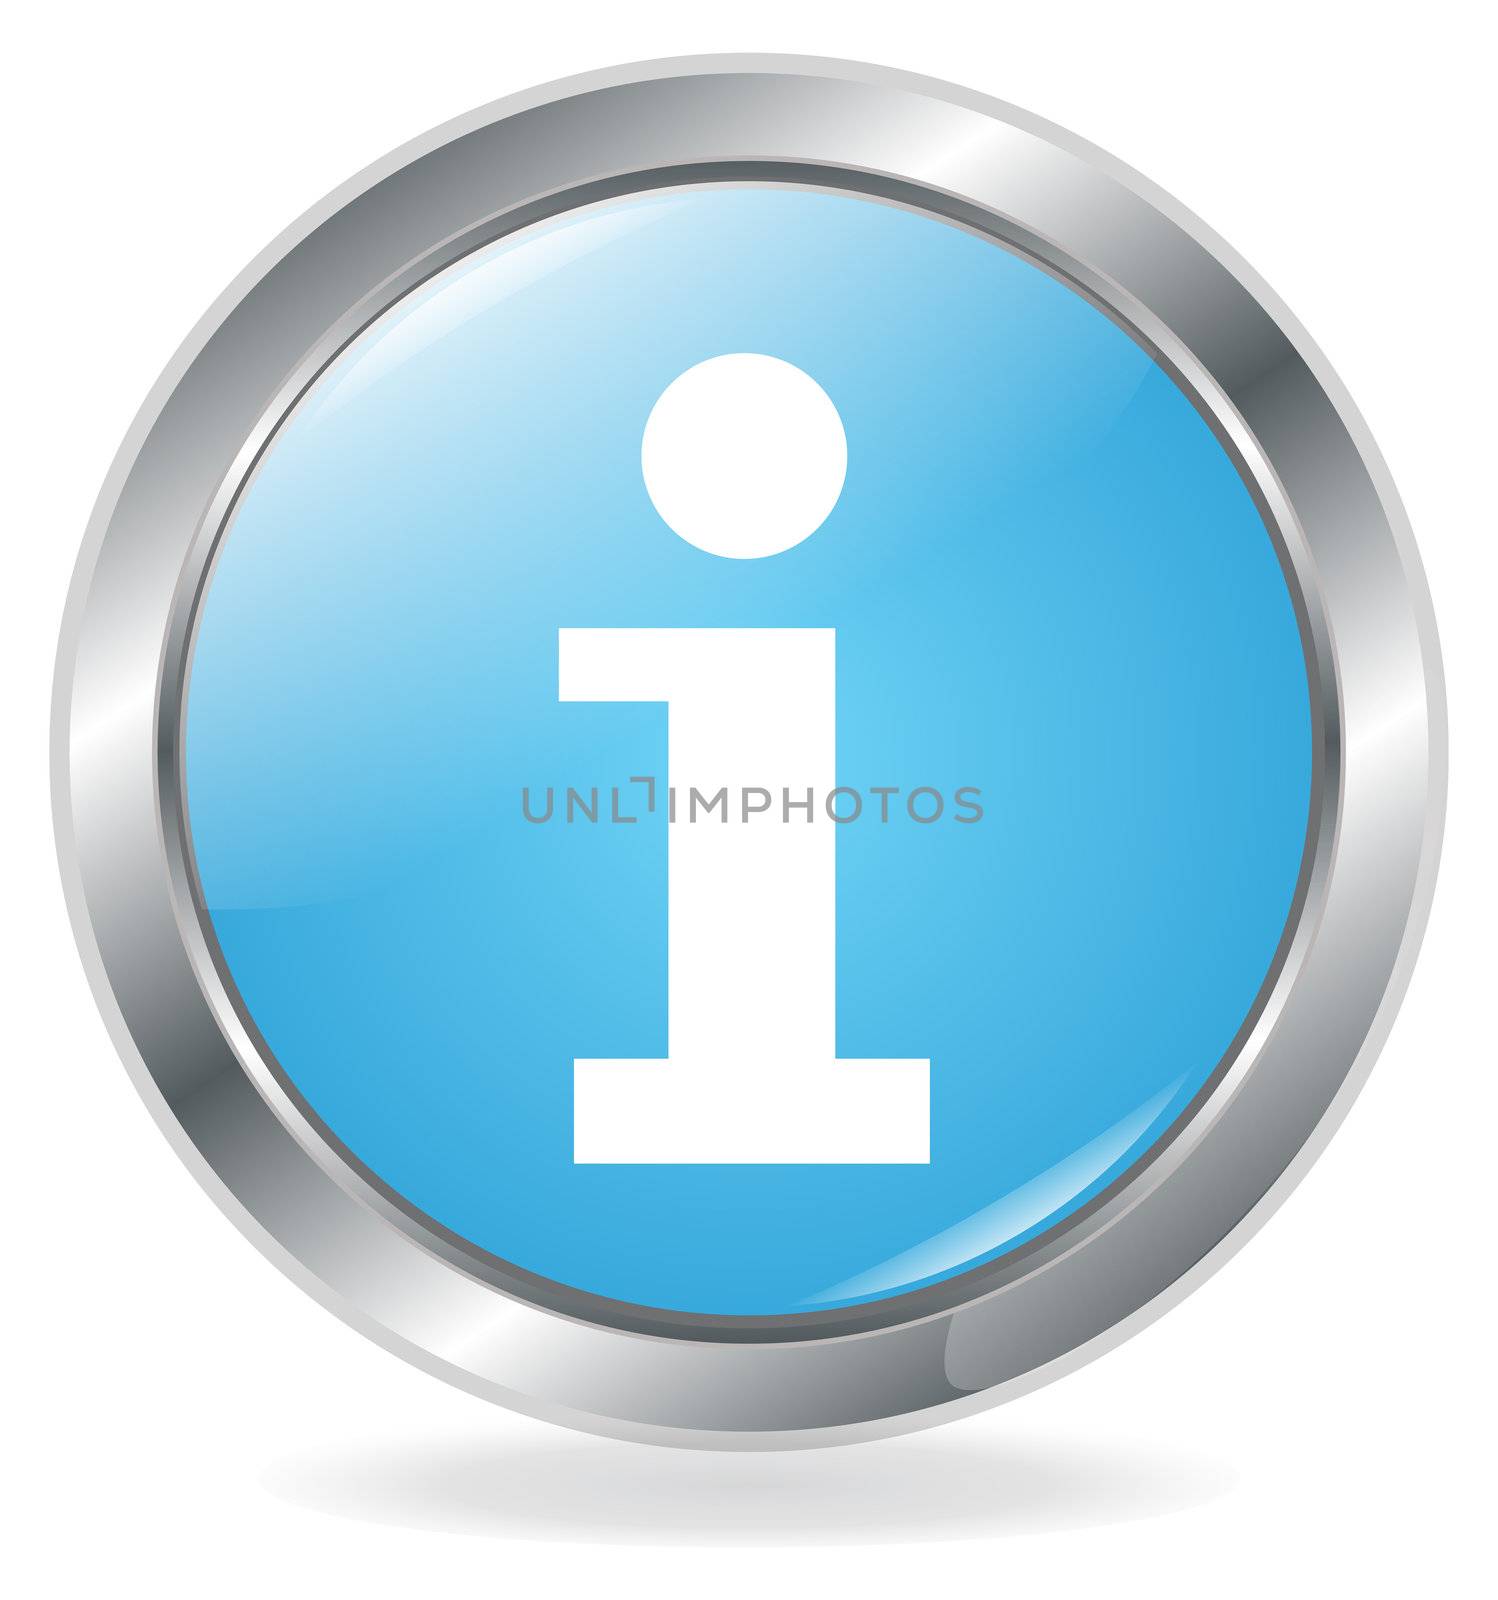 info button by Bestpictures